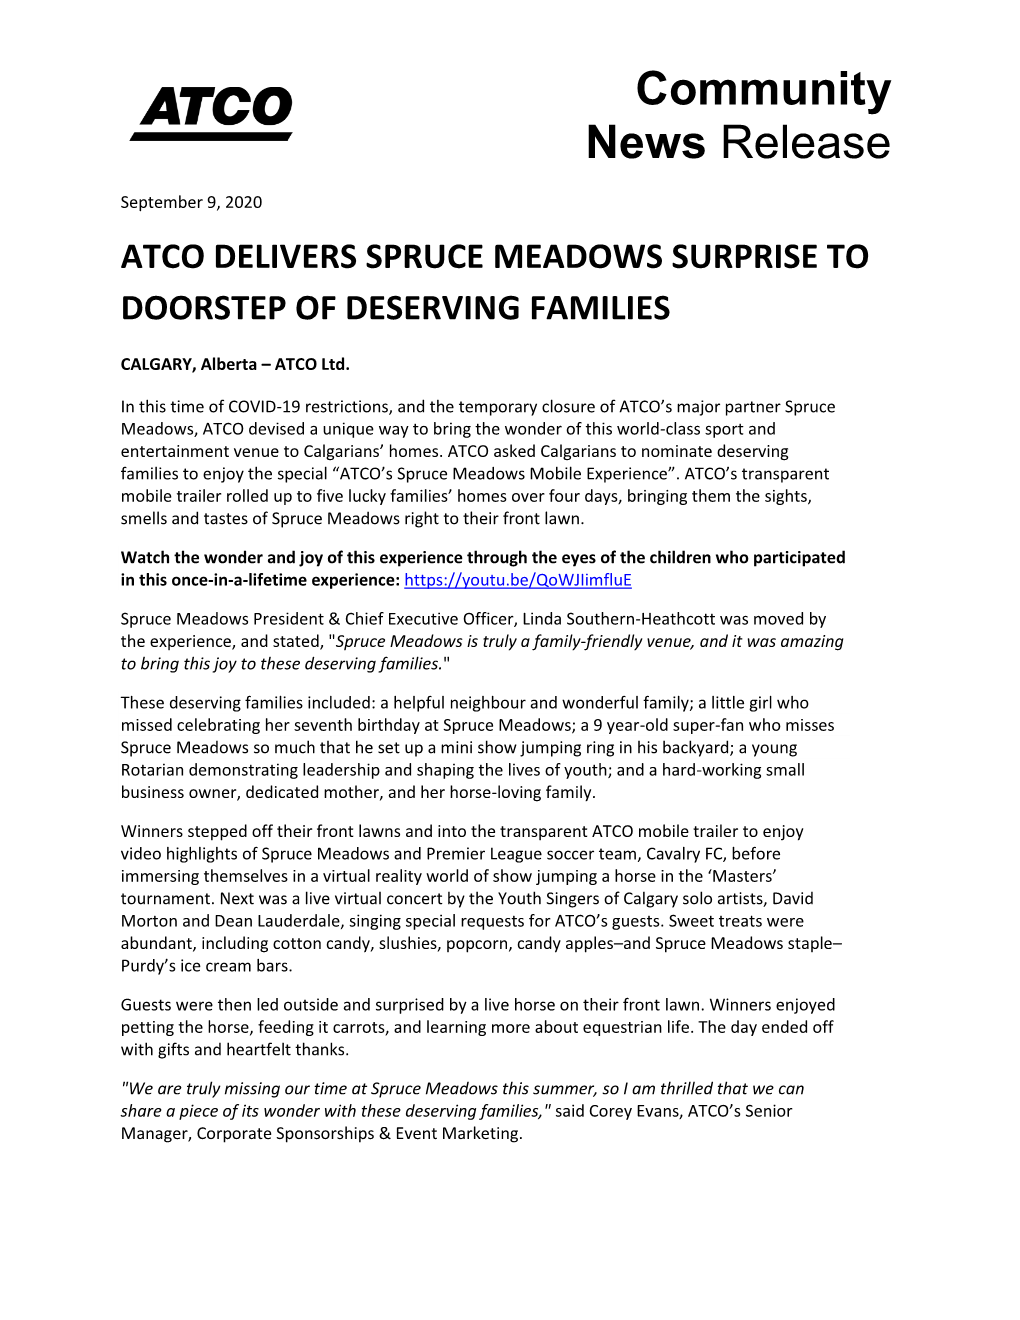 ATCO Ltd--ATCO Delivers Spruce Meadows Surprise to Doorstep of D